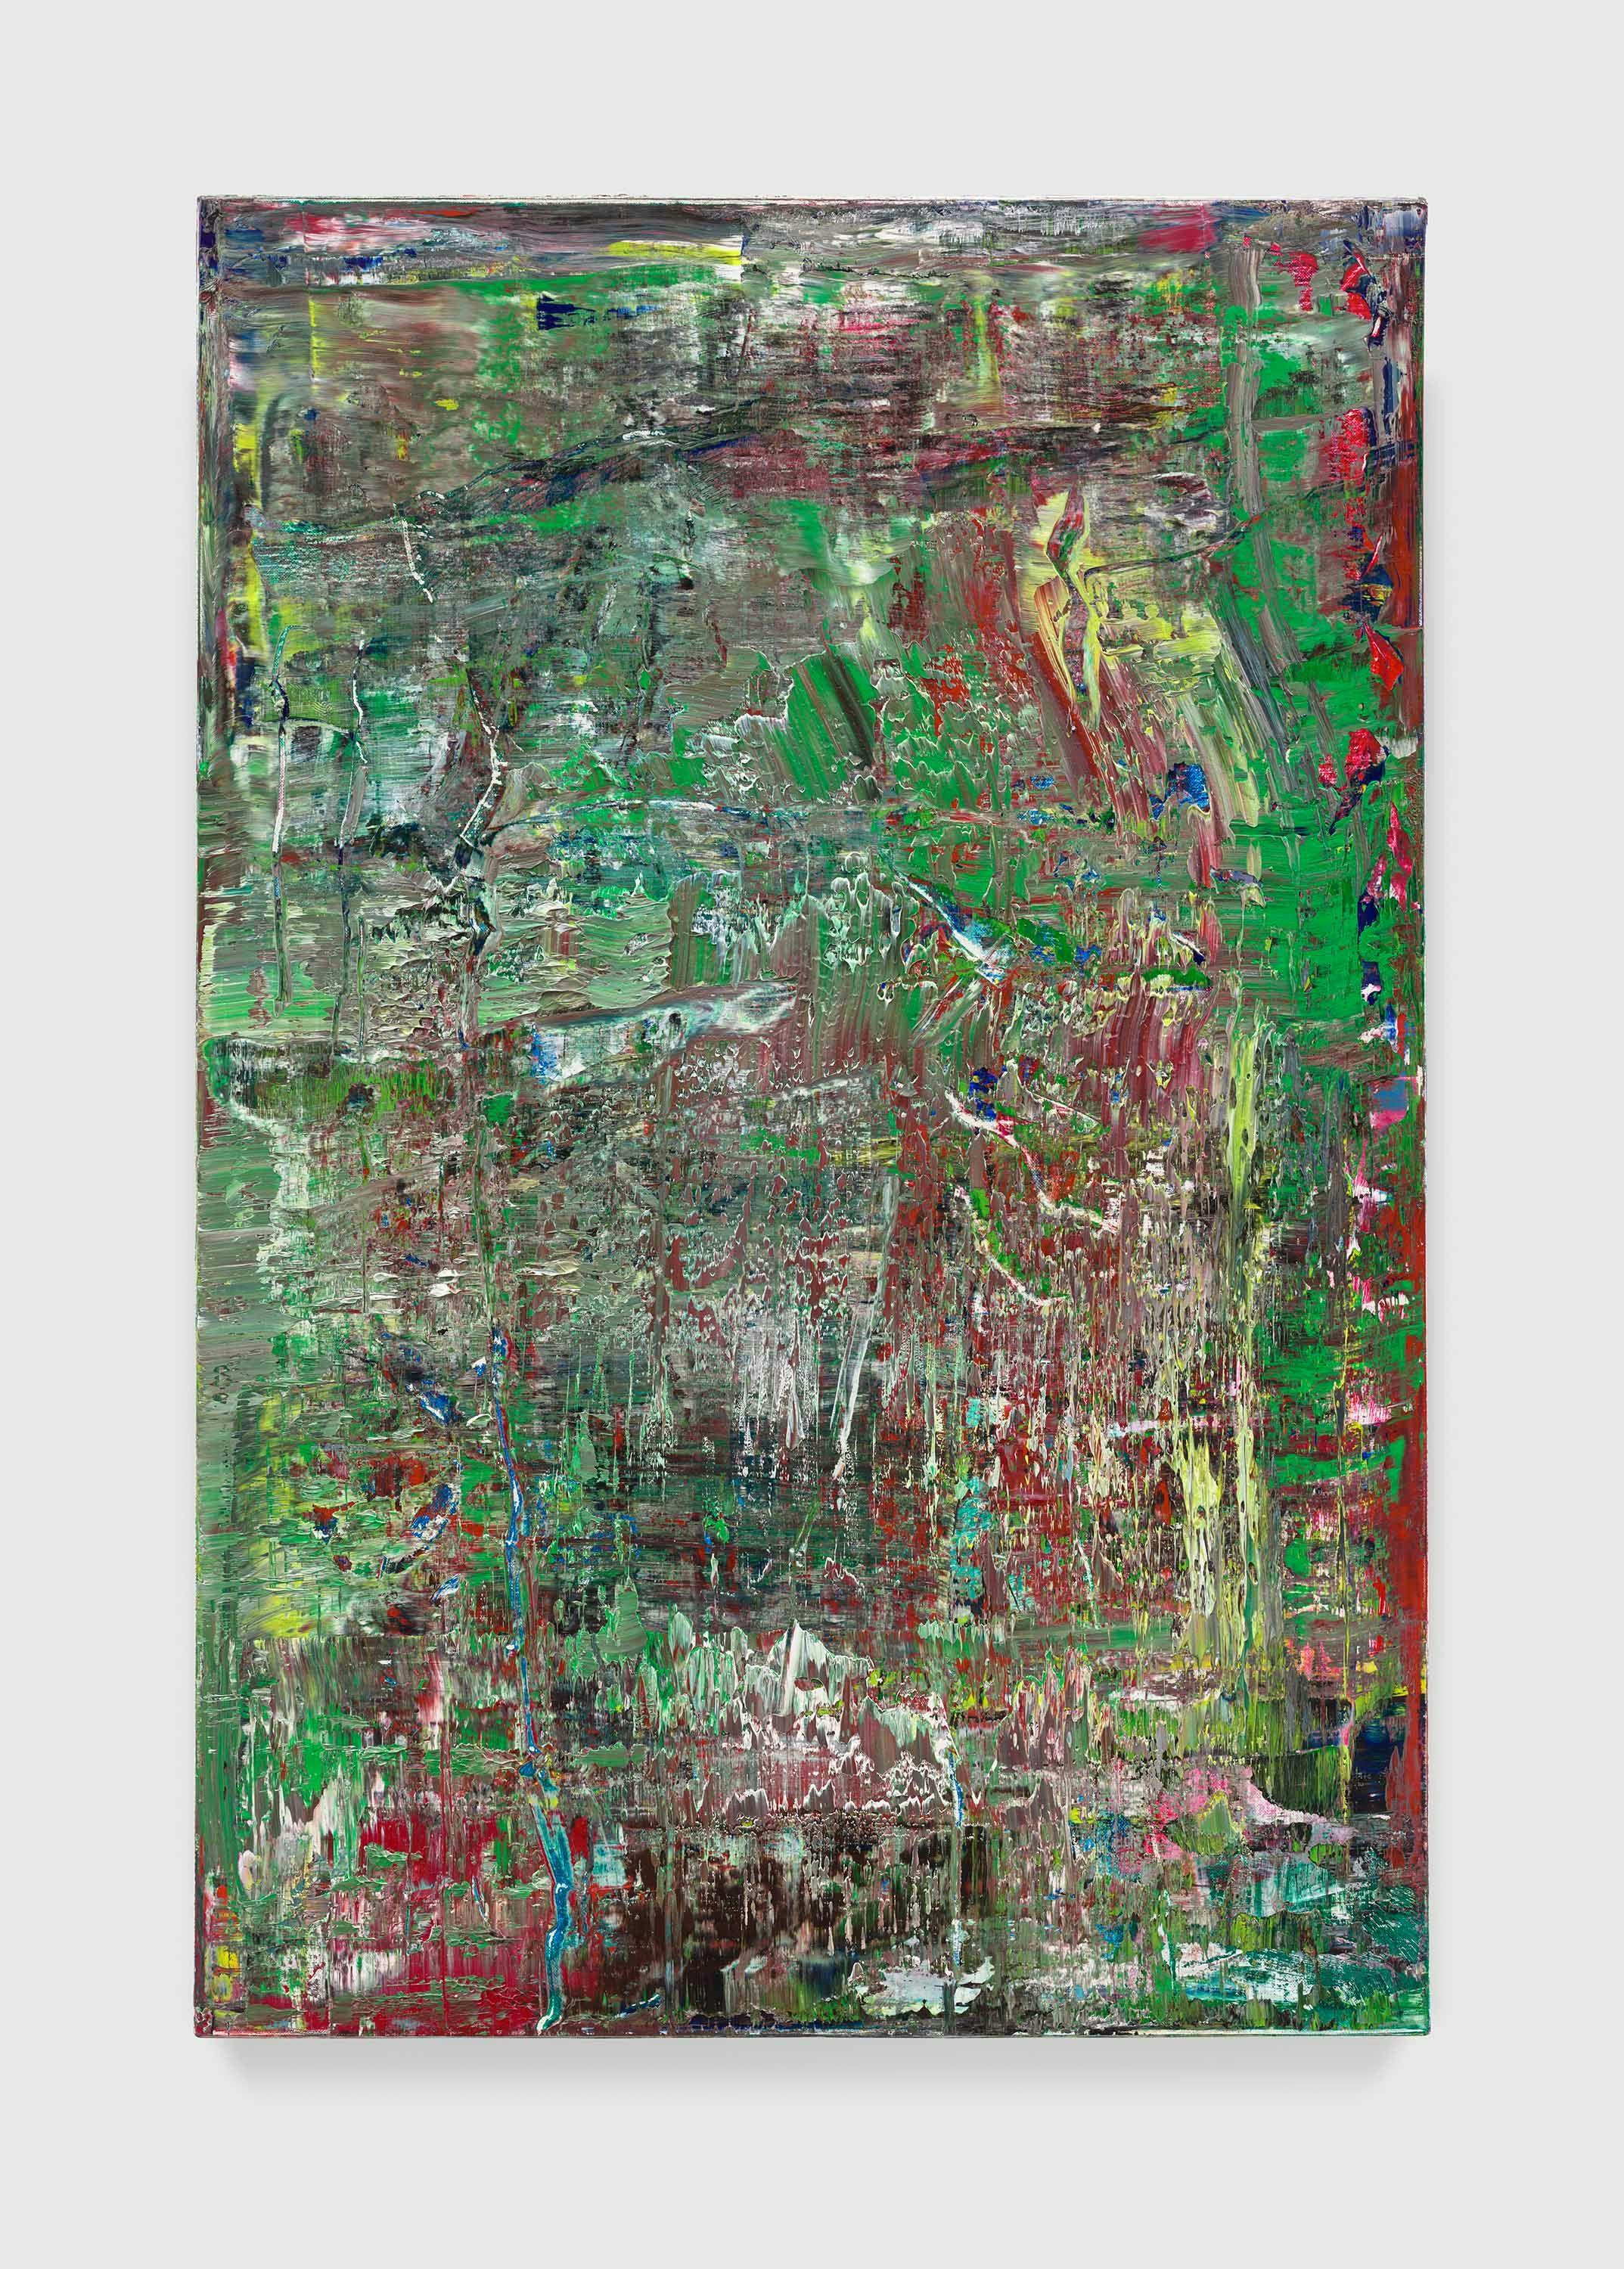 A painting by Gerhard Richter, titled Abstraktes Bild (Abstract Painting), dated 2016.